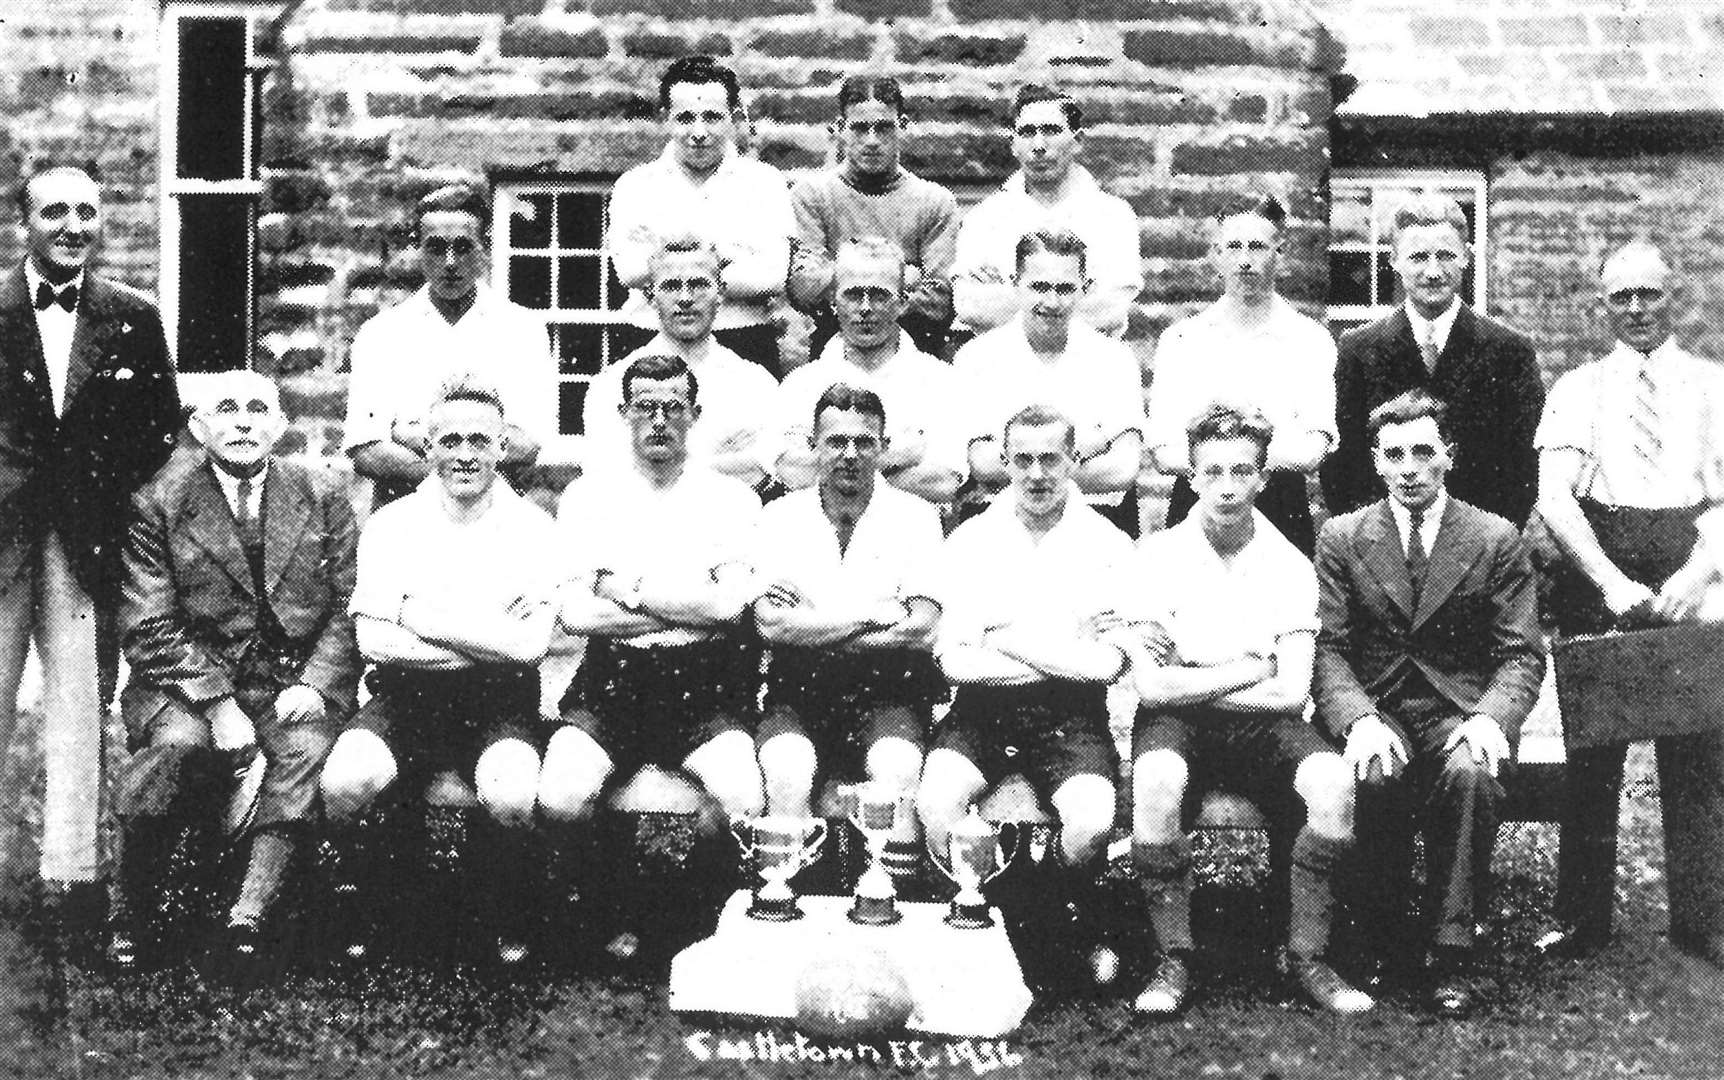 The Castletown team who were undefeated in Caithness rural competitions in 1936, winning the league and two cups.